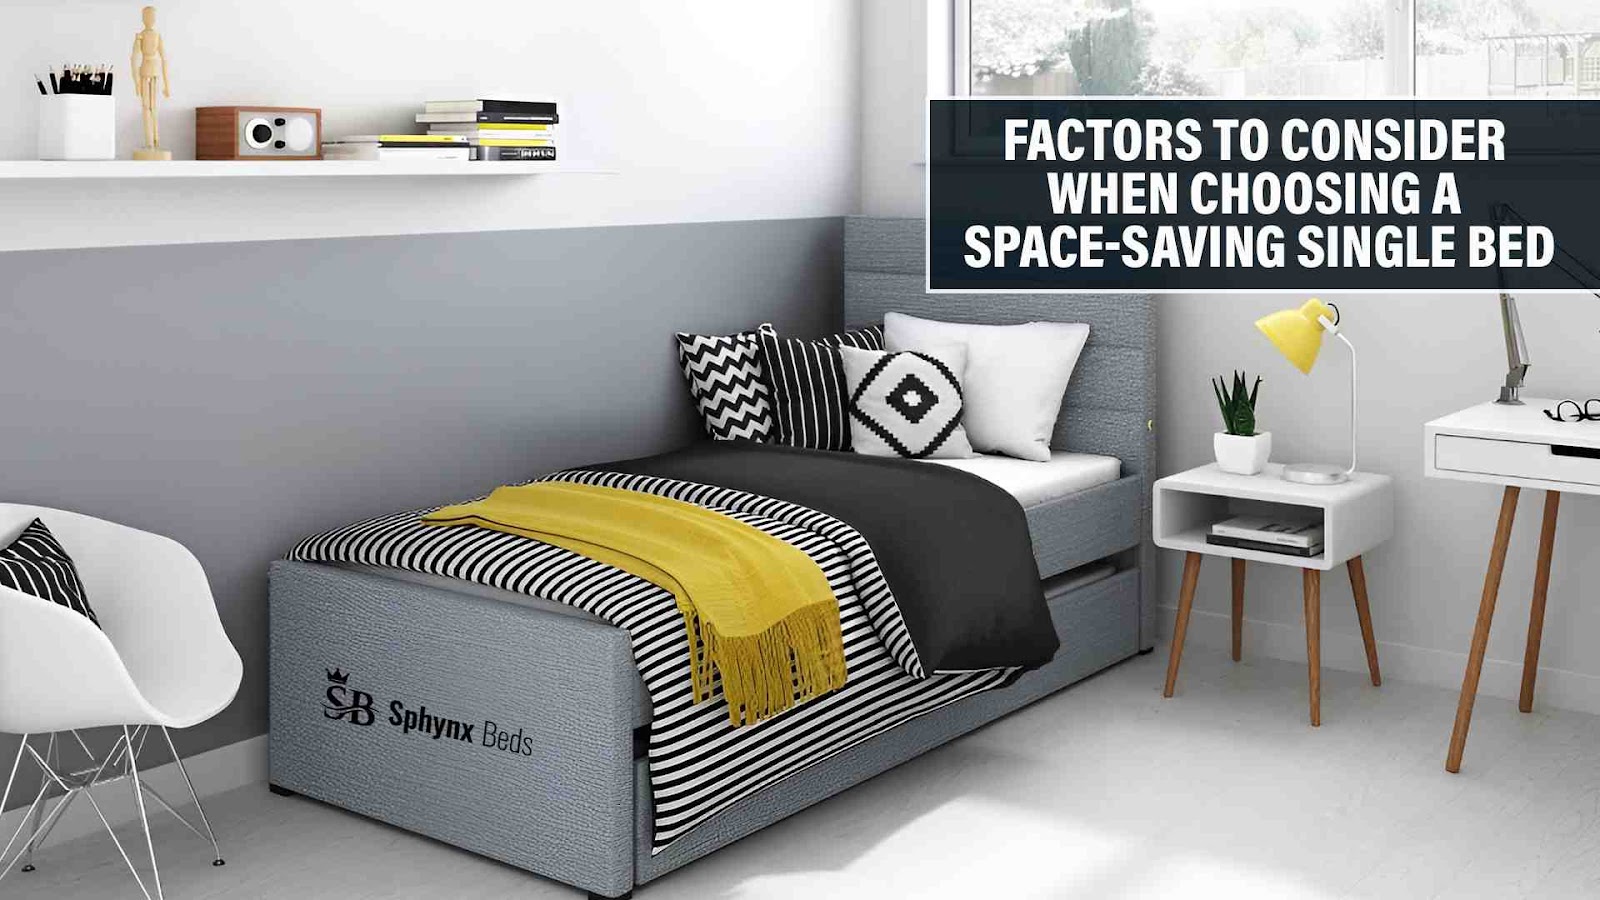 Factors to Consider When Choosing a Space-Saving Single Bed: